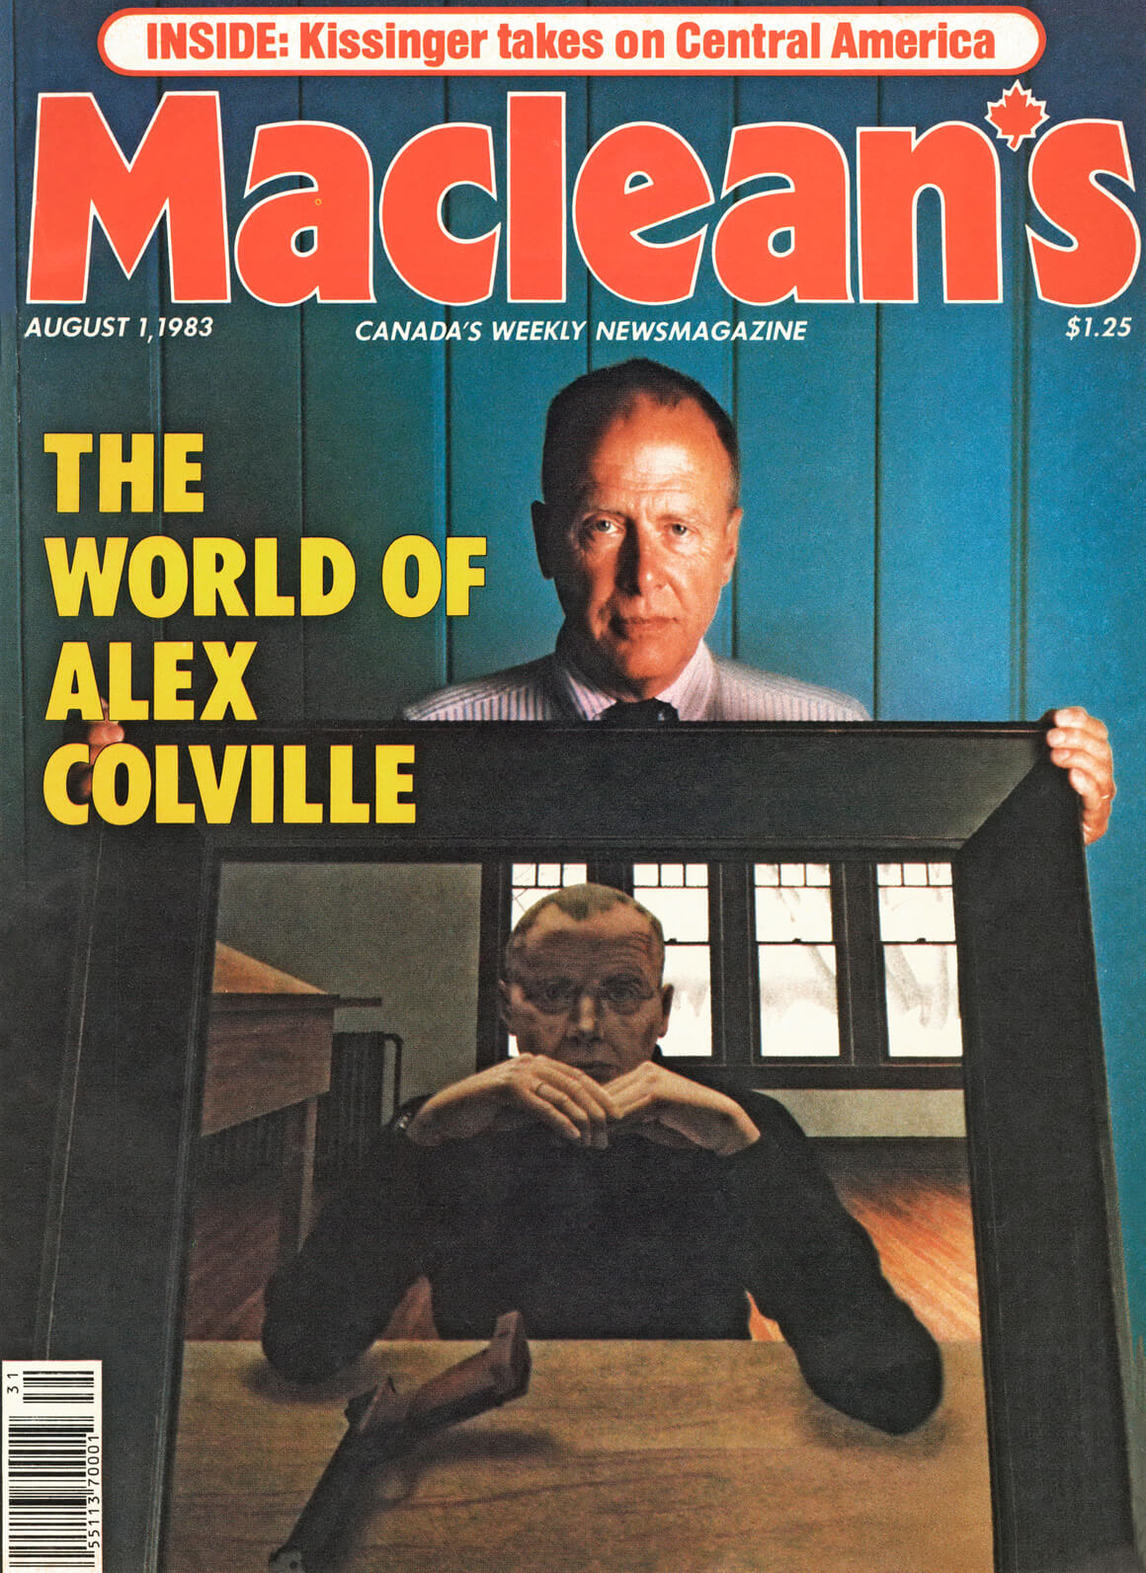 Art Canada Institute, Alex Colville, Cover of Maclean’s magazine featuring “The World of Alex Colville,”